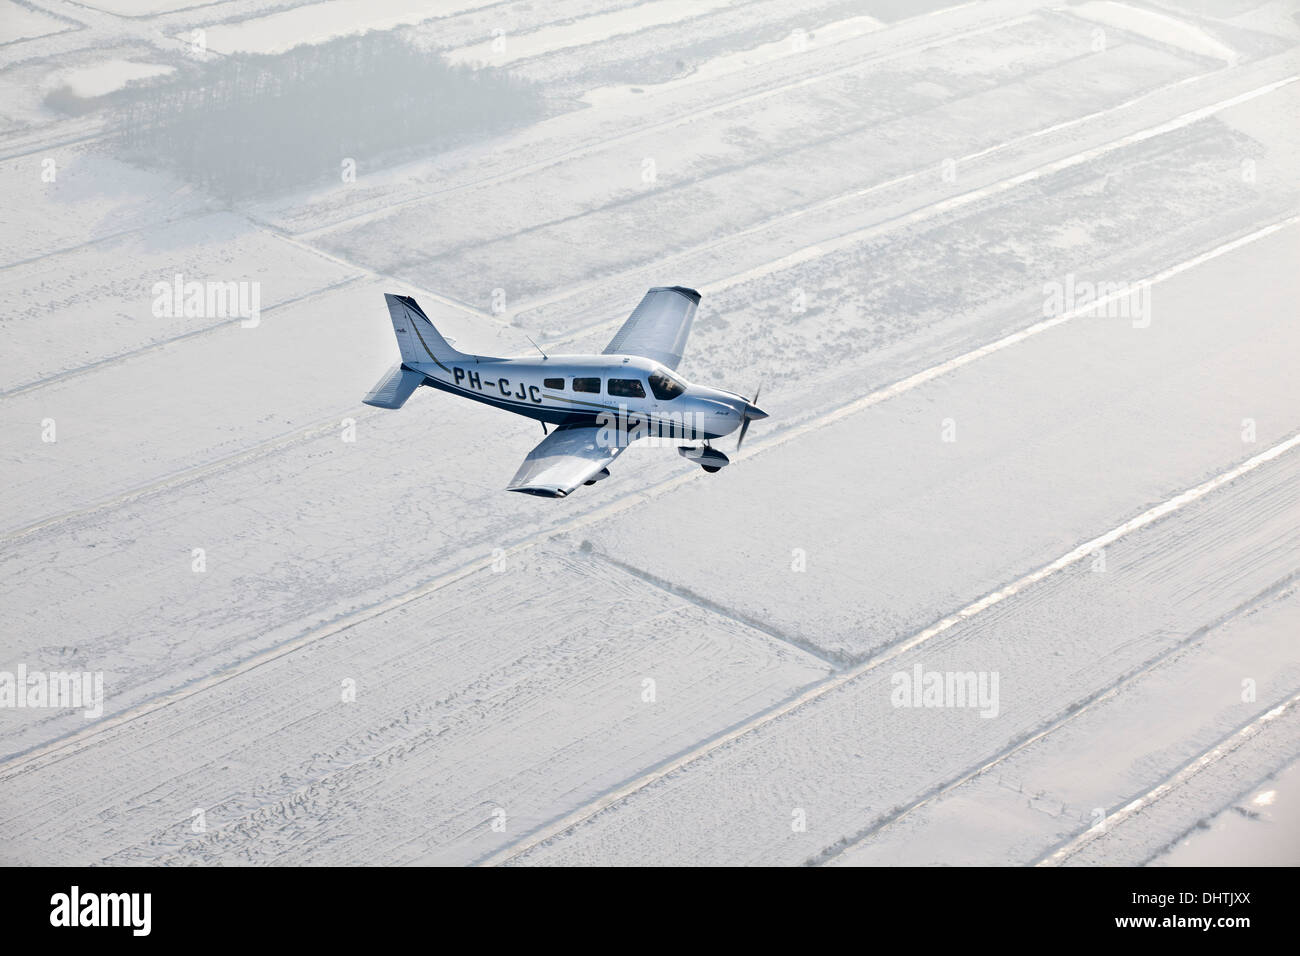 Netherlands, Loosdrecht, Small aircraft flying over snowy fields. Aerial Stock Photo